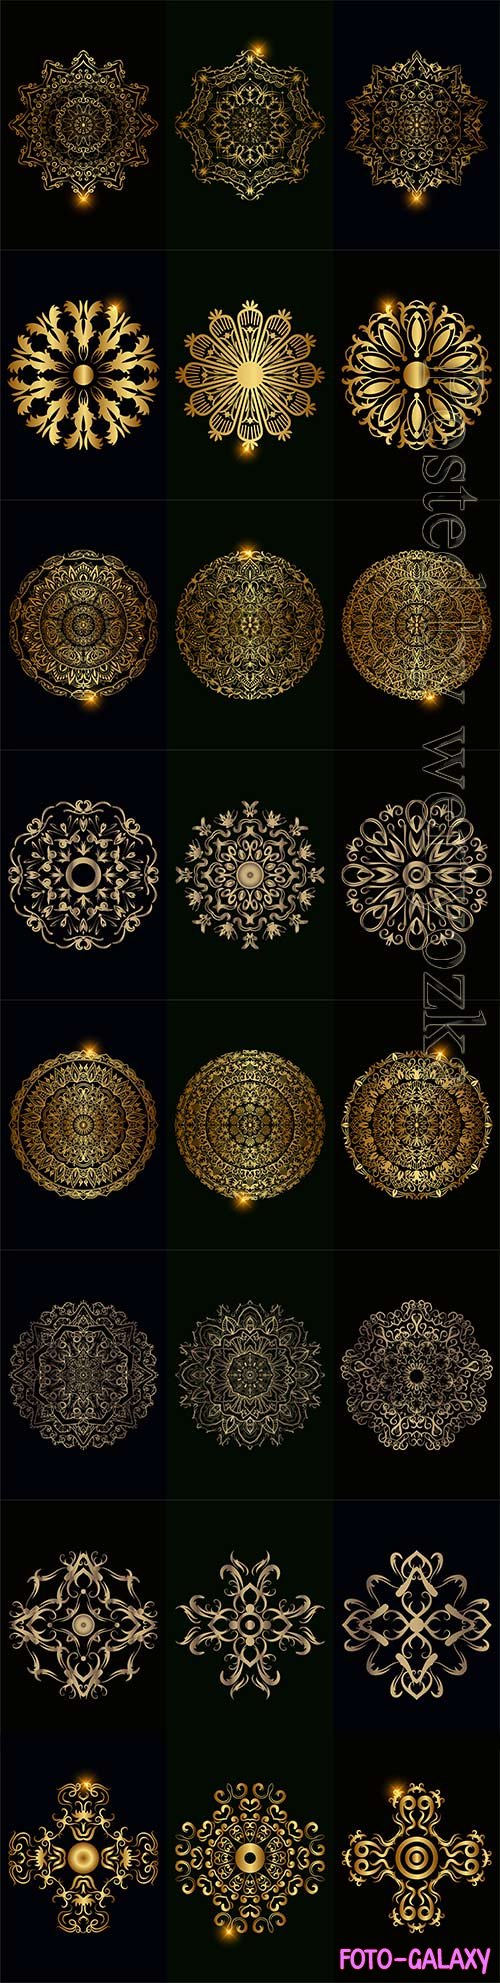 Collection of mandala ornament or flower vector